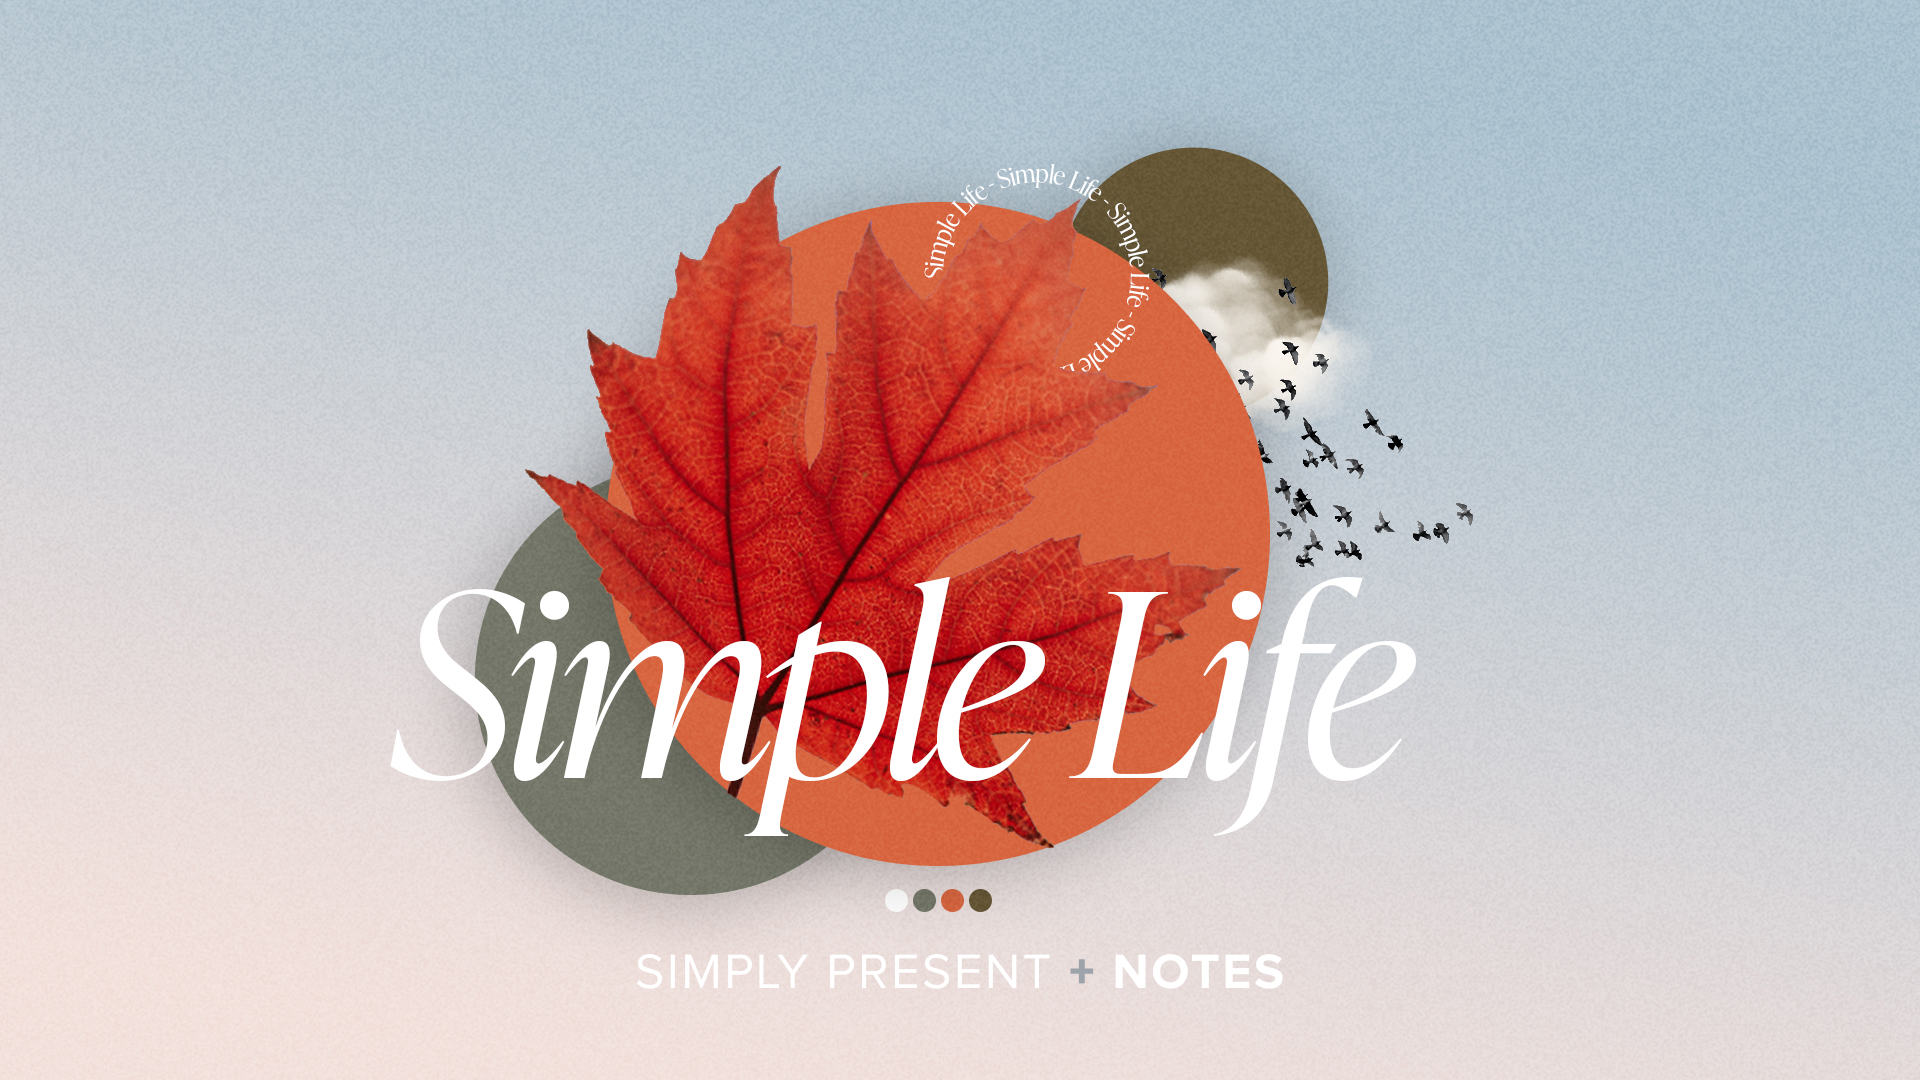 Simply Present - Notes